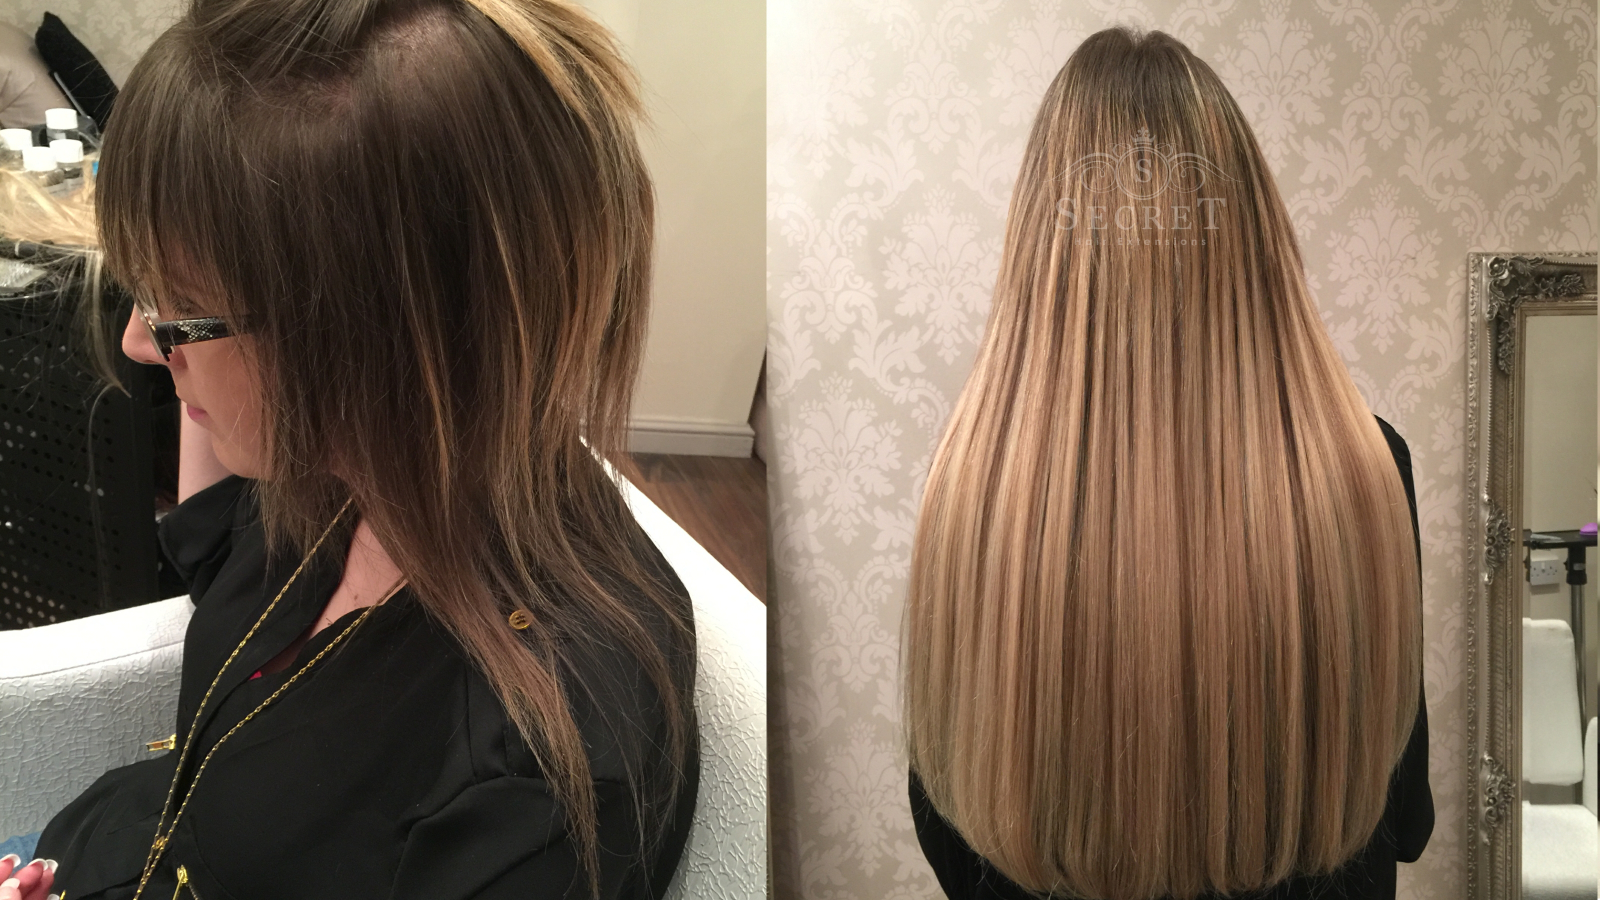 Hair Extensions Before and After | Secret Hair Extensions